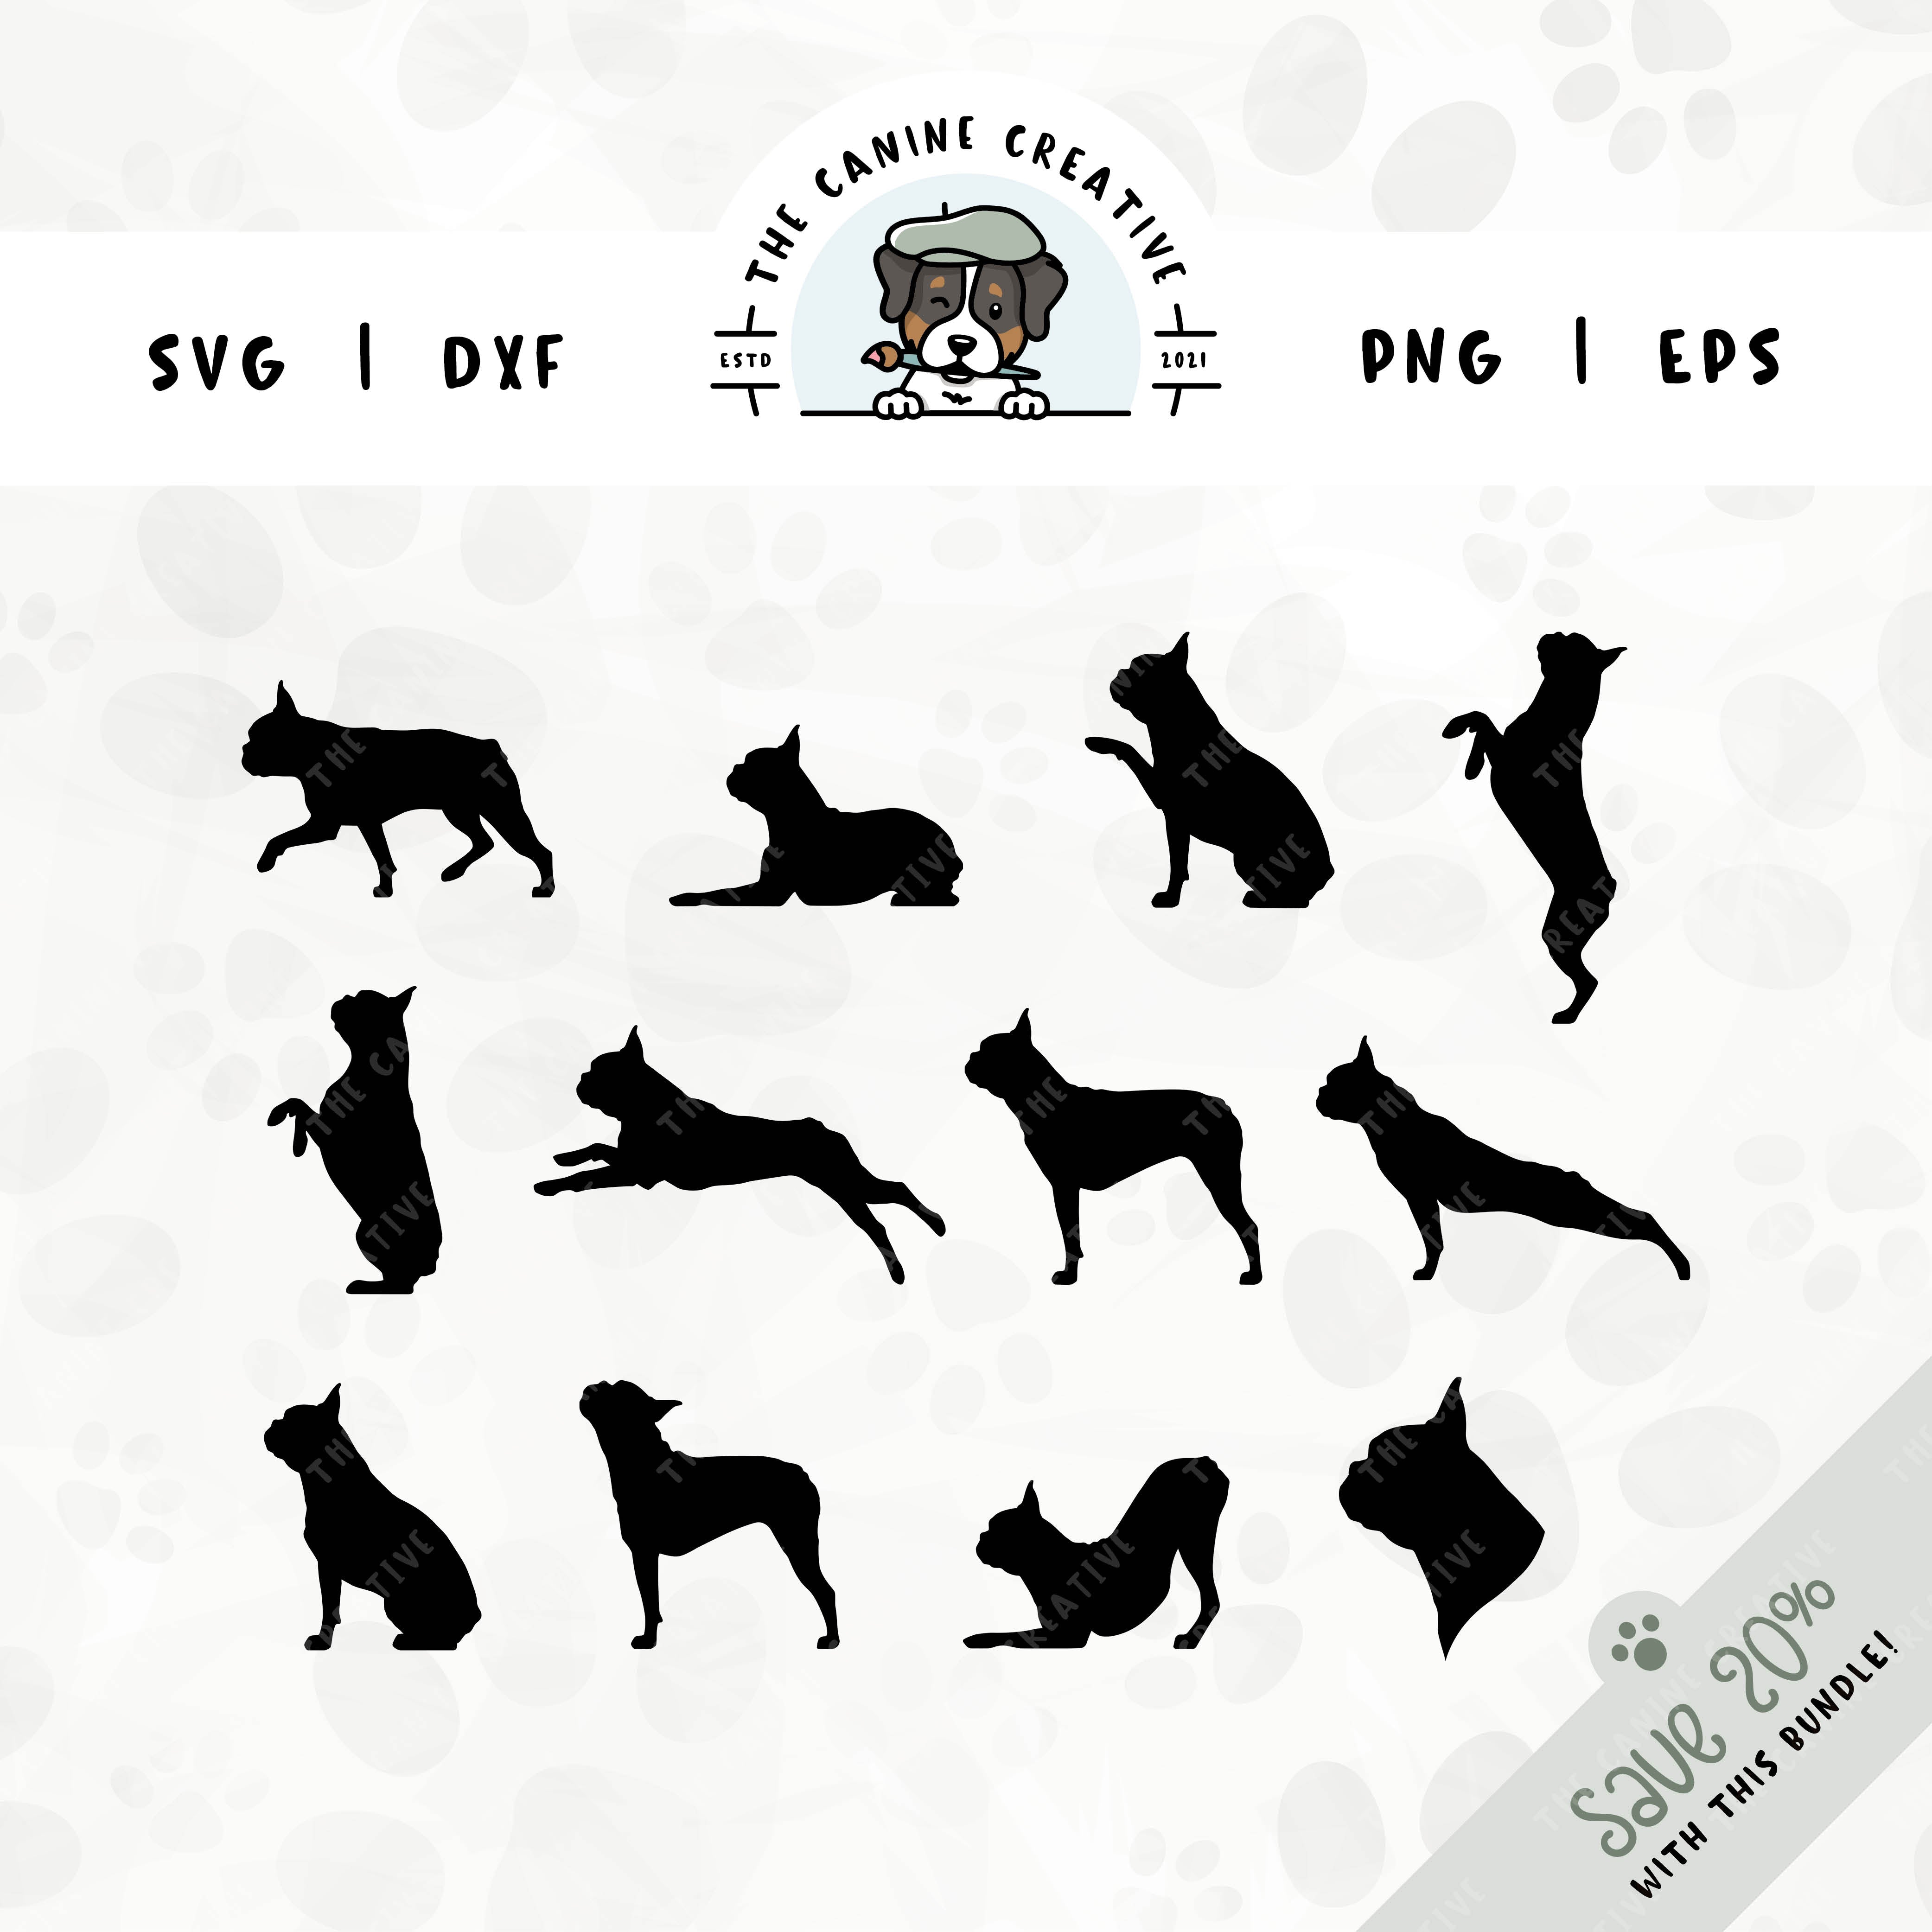 This 12-pack Boston Terrier silhouette bundle features a dog's head in profile, along with various poses including running, laying down, playing, standing, sitting, walking, jumping up, begging, barking, stretching, and shaking a paw. File formats include: SVG, DXF, PNG, and EPS.